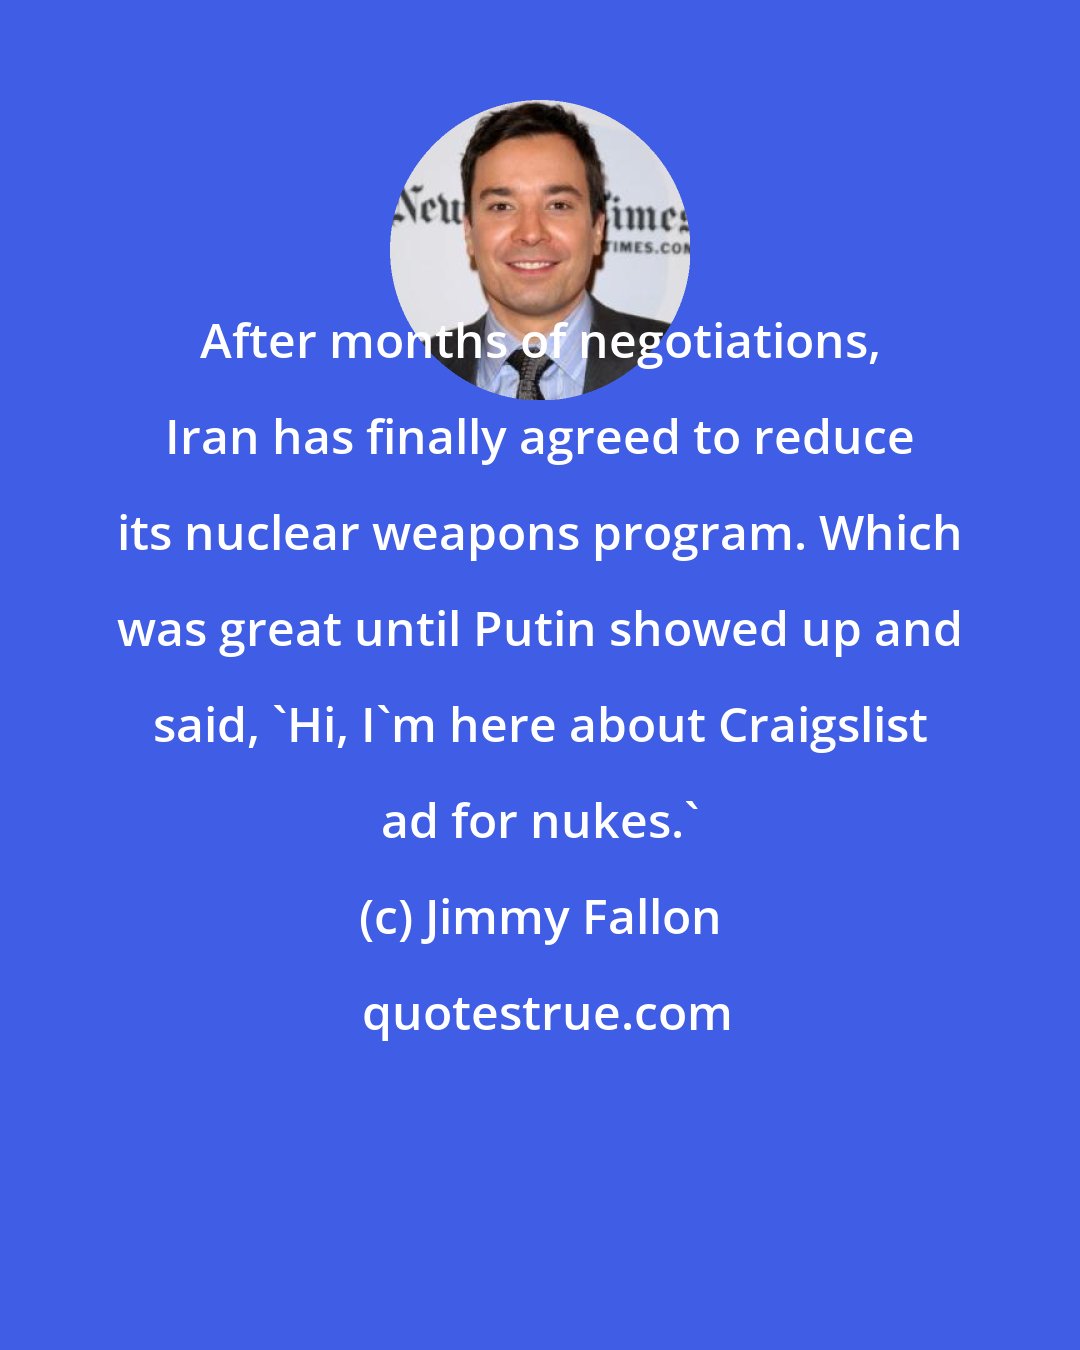 Jimmy Fallon: After months of negotiations, Iran has finally agreed to reduce its nuclear weapons program. Which was great until Putin showed up and said, 'Hi, I'm here about Craigslist ad for nukes.'